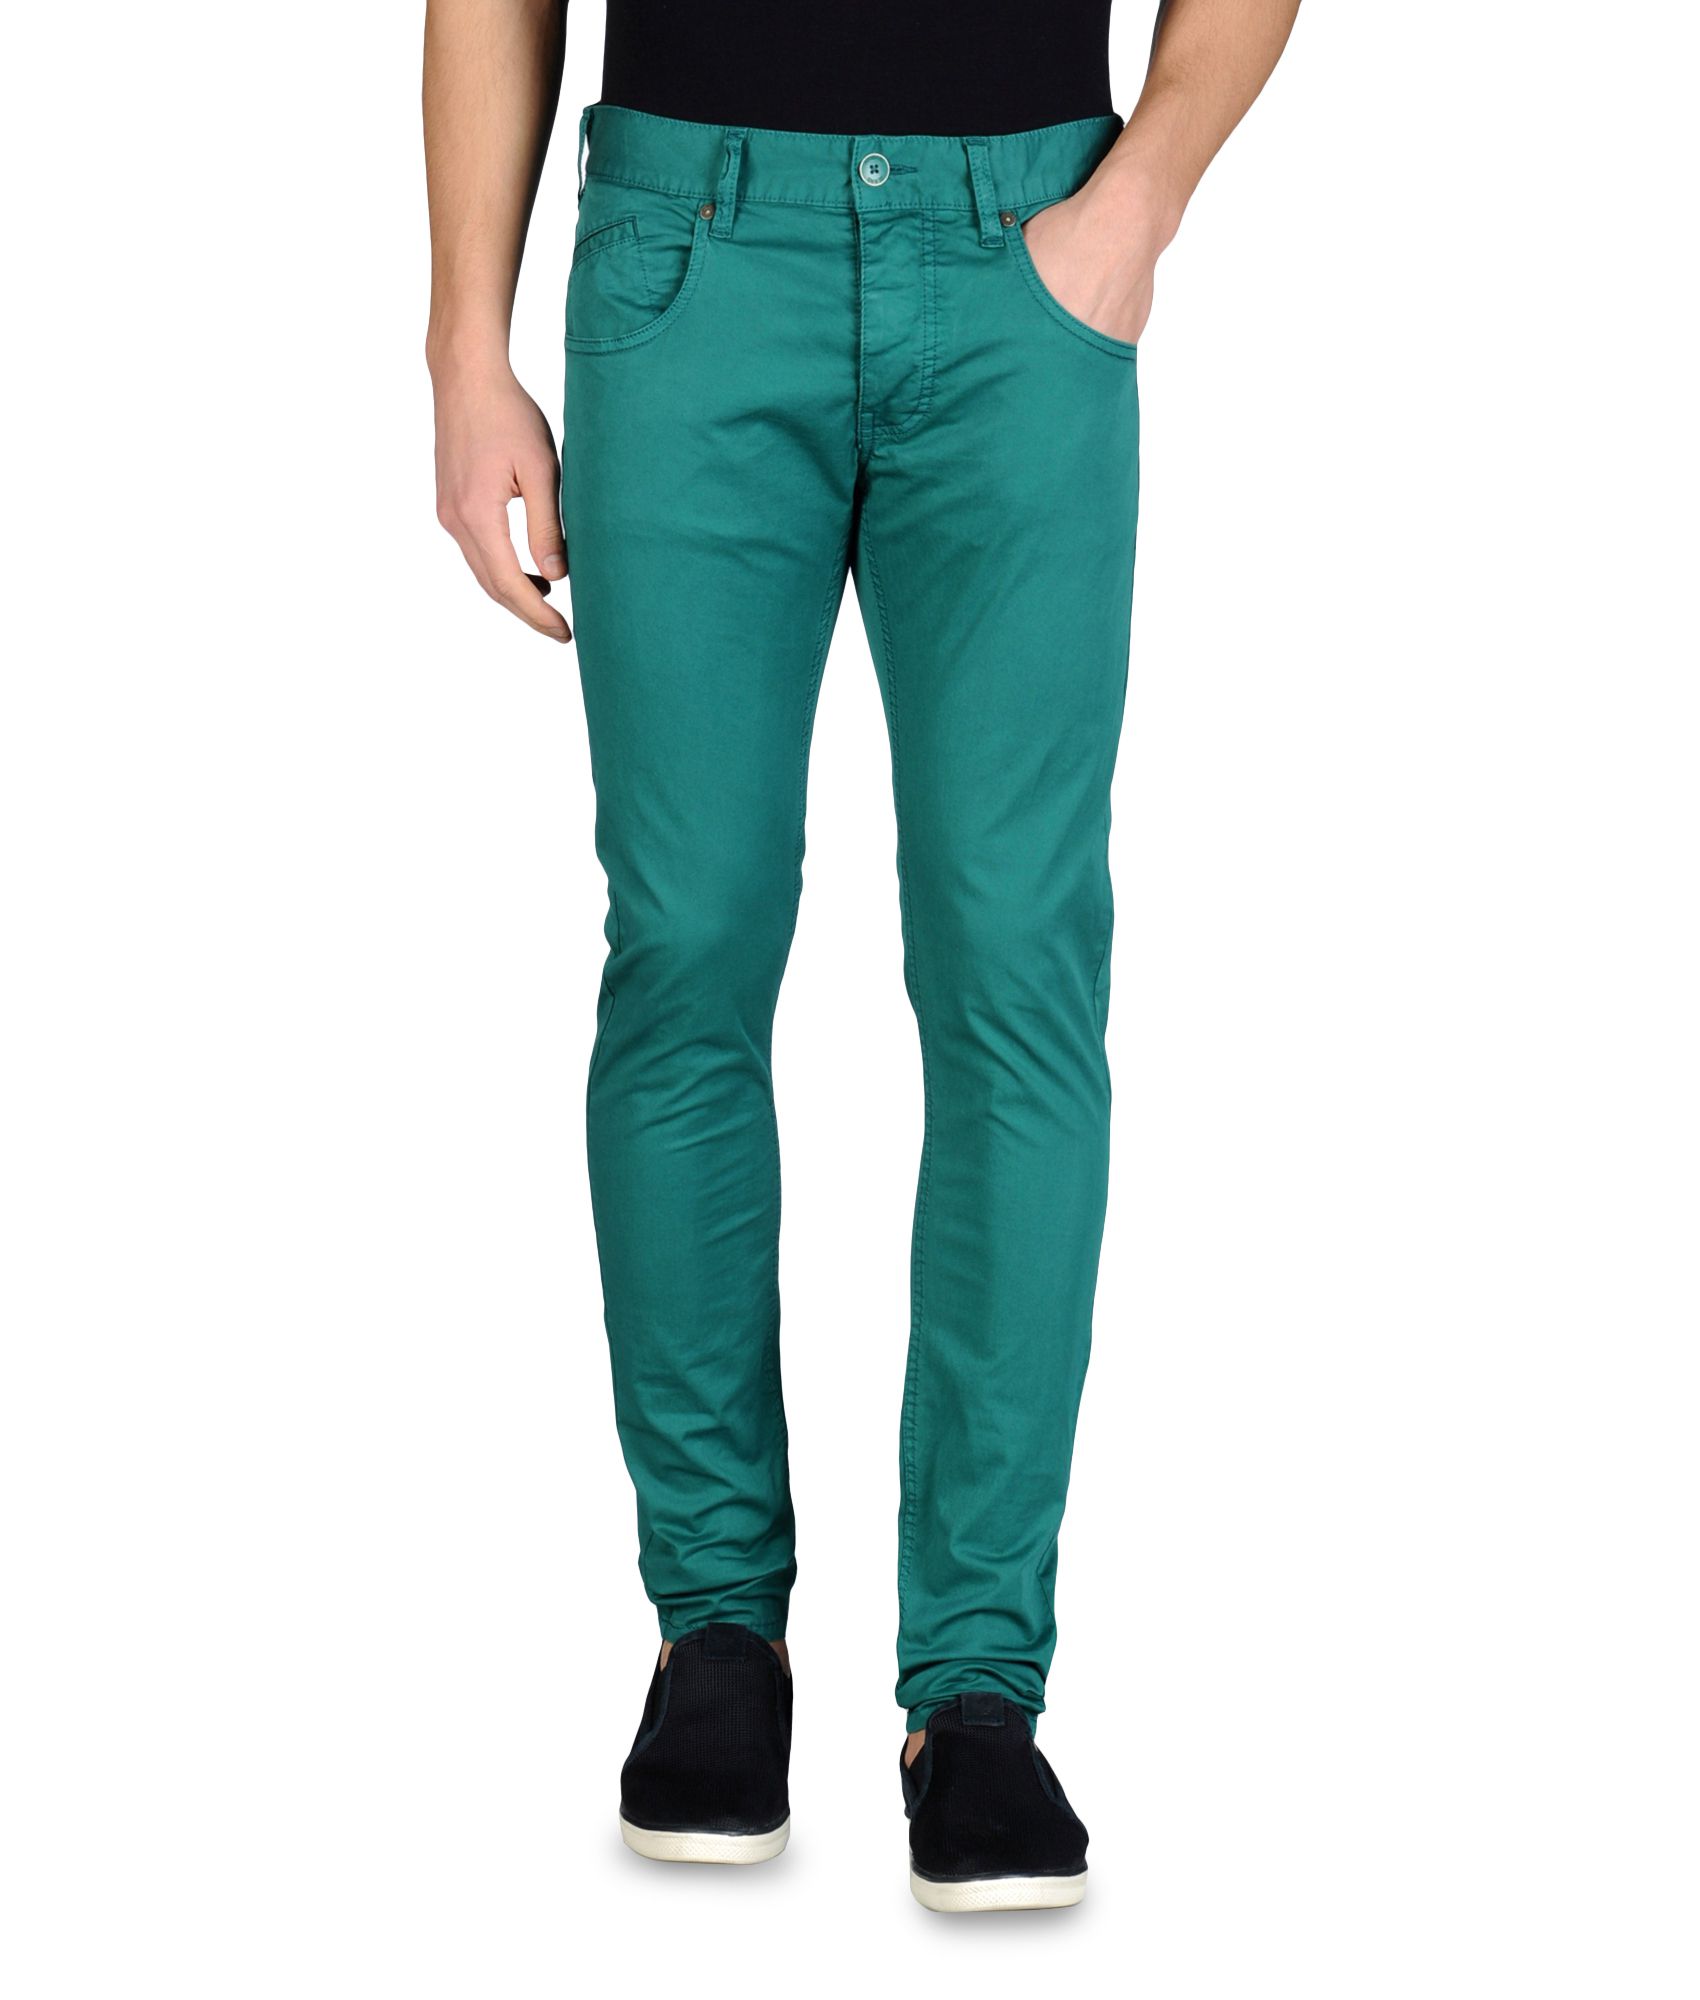 Armani Jeans 5 Pocket Slim Fit Jeans in Green for Men (Emerald green ...